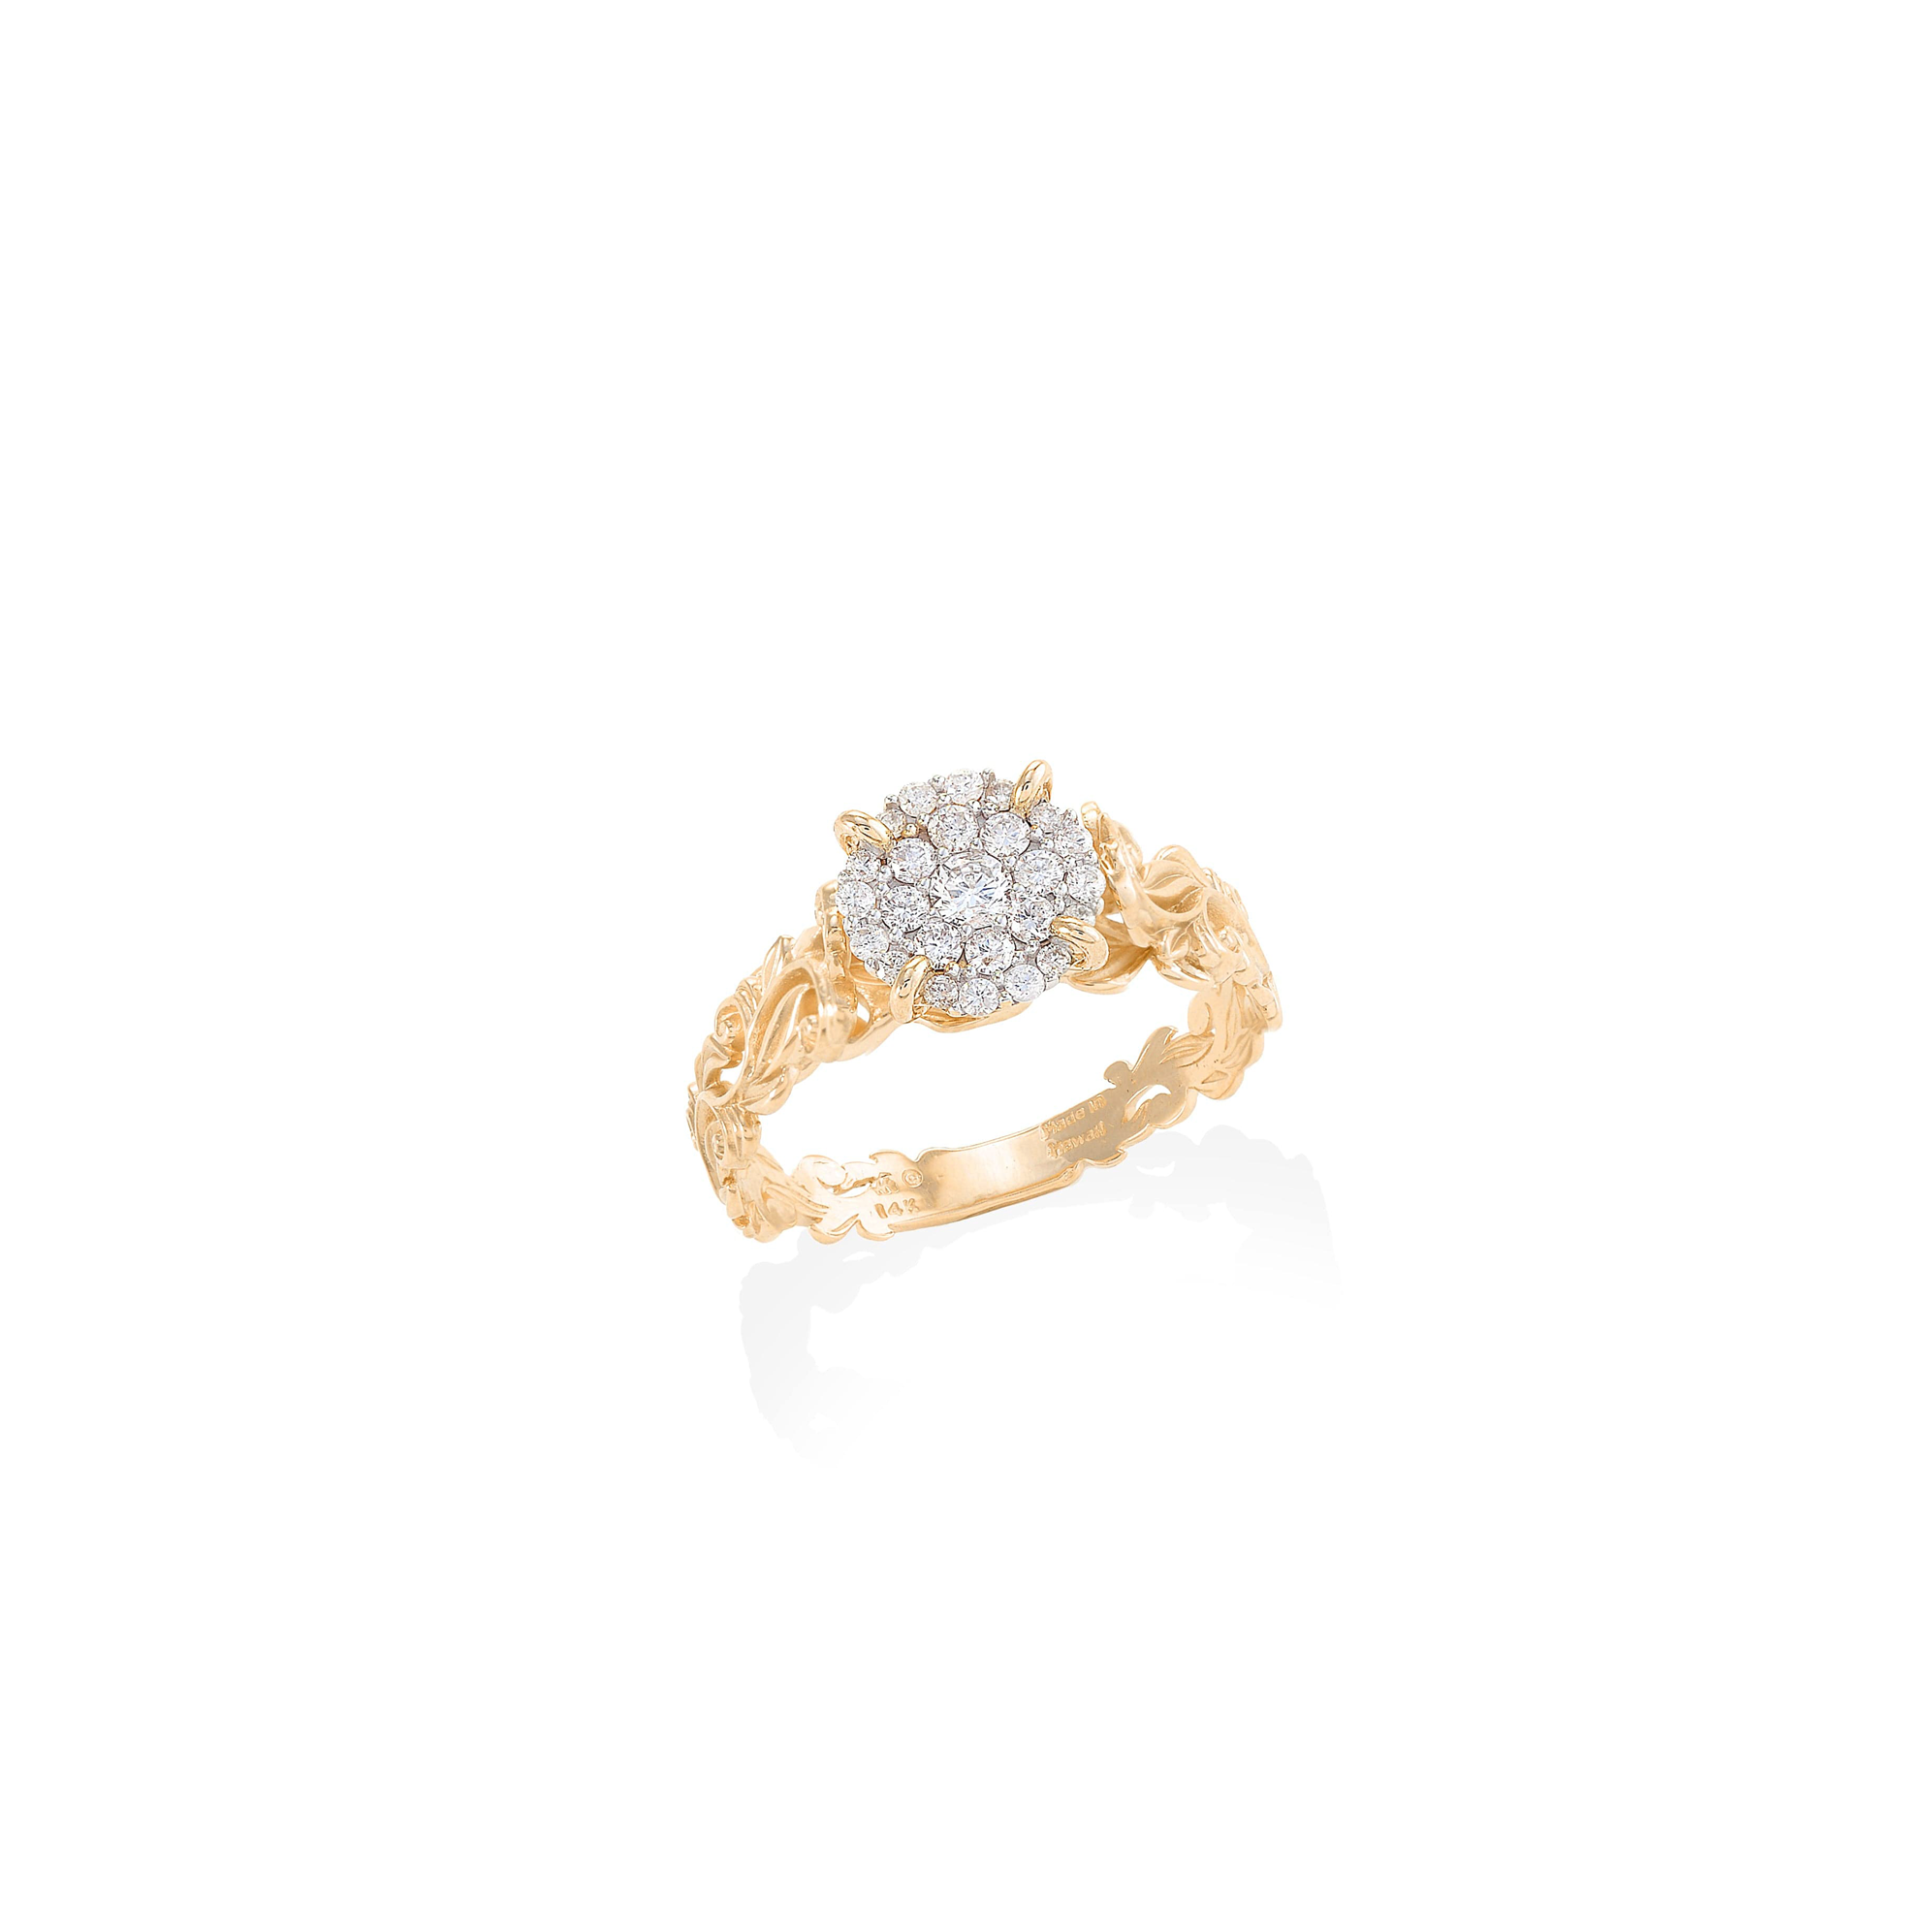 Living Heirloom Engagement Ring in Gold with Diamonds